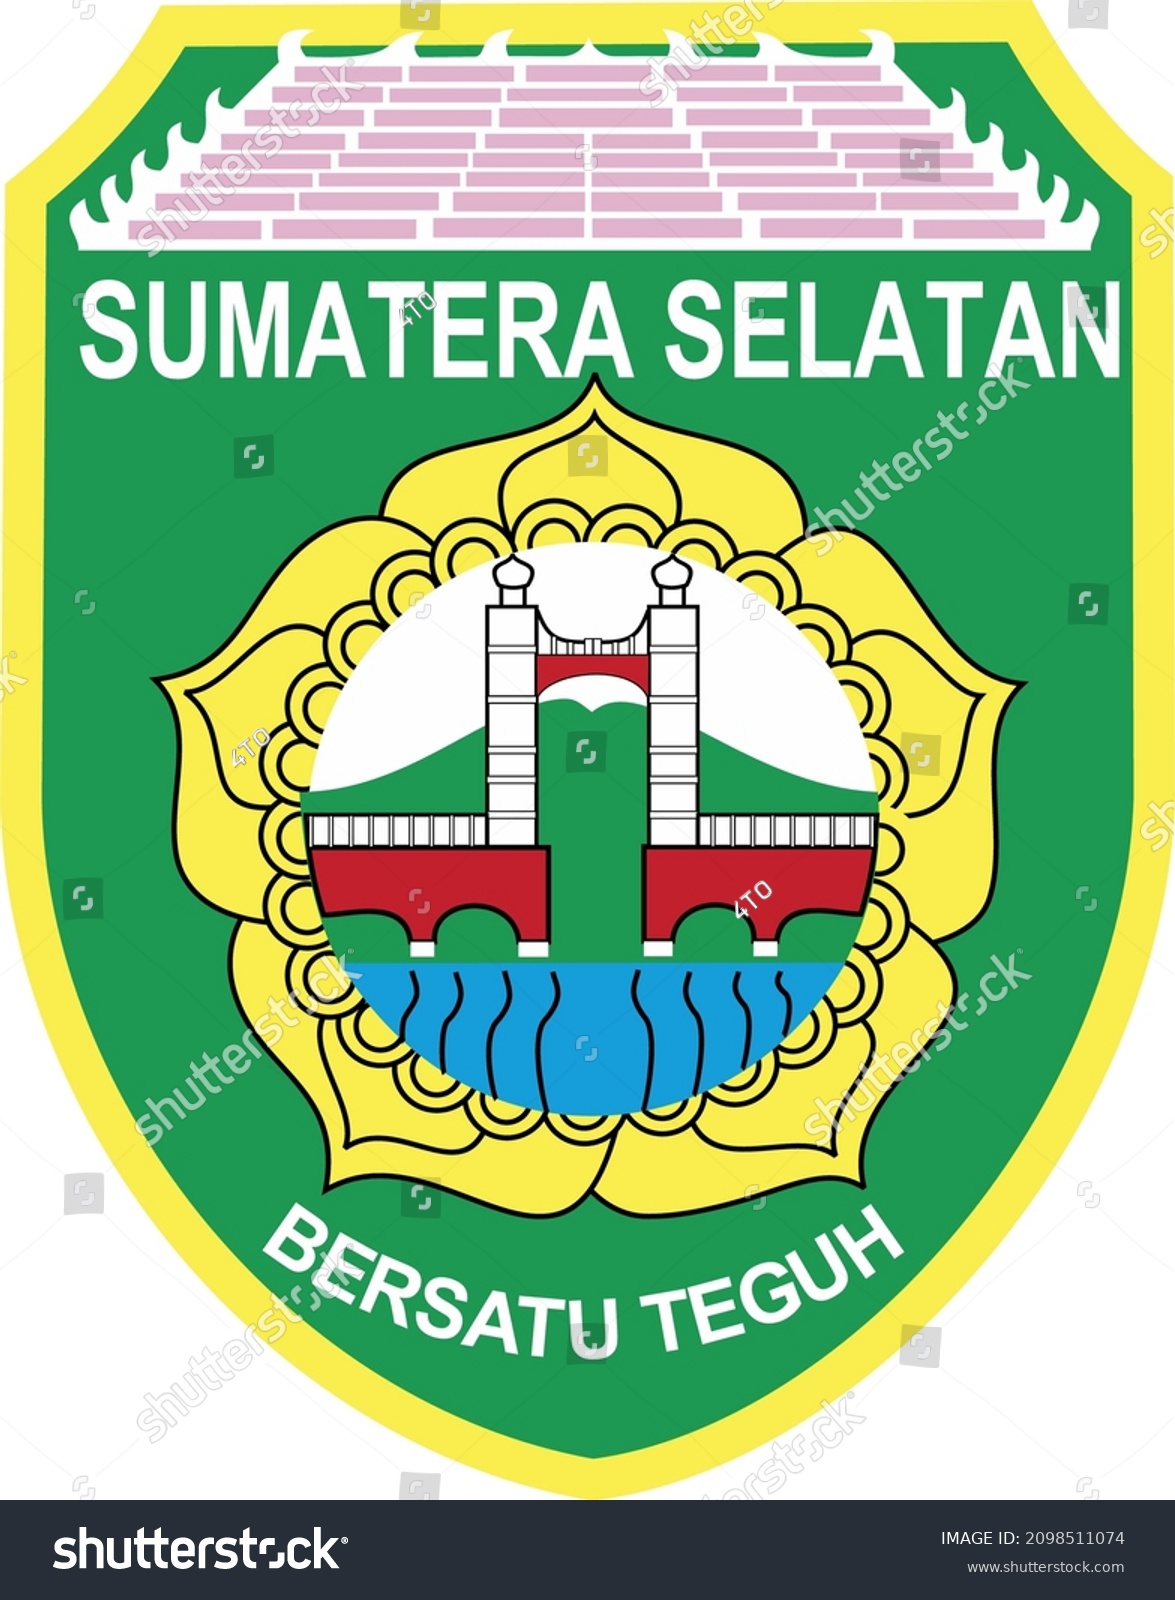 SVG of the logo of the province of south sumatra, the coat of arms of South Sumatra in the form of a five-pointed shield. Inside there are paintings of lotus flowers, nine stems, the Ampera bridge, and mount svg